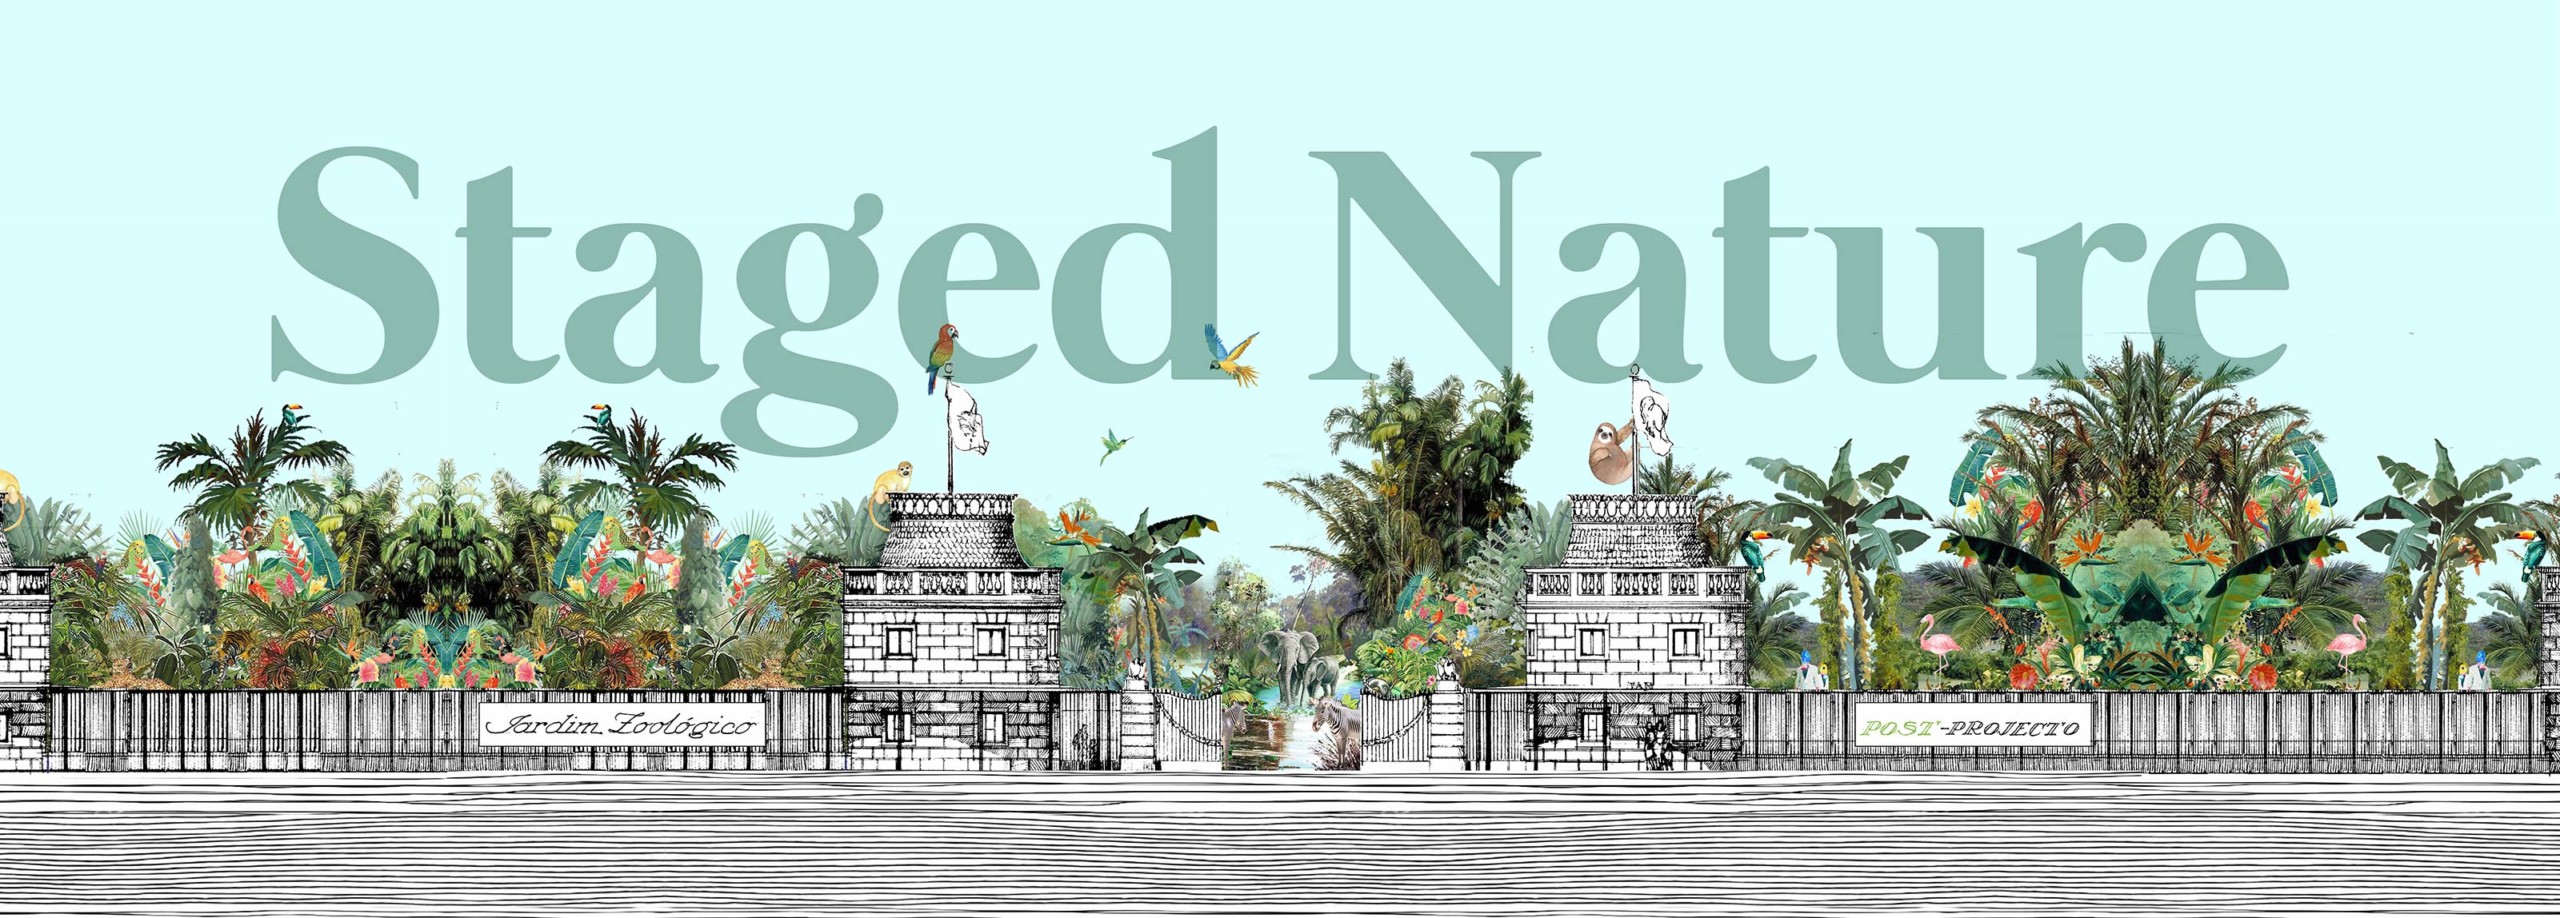 StagedNature